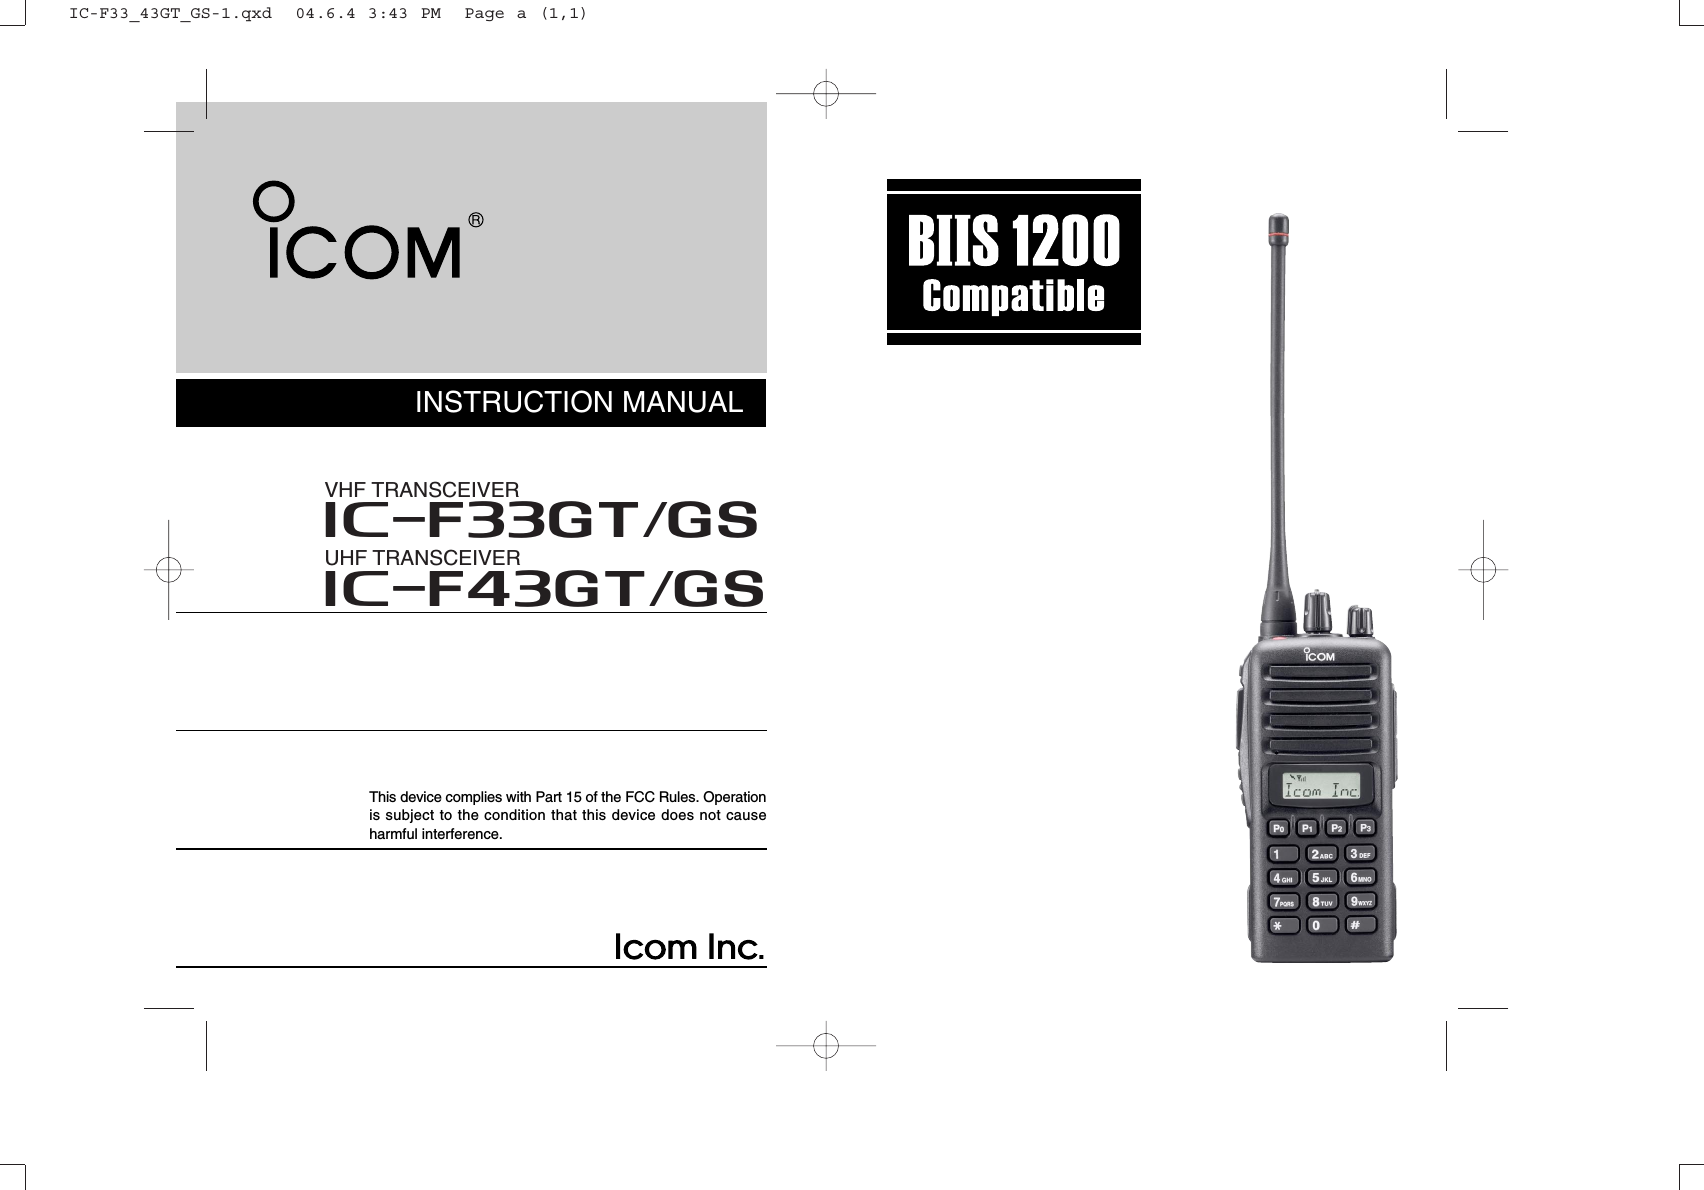 INSTRUCTION MANUALThis device complies with Part 15 of the FCC Rules. Operationis subject to the condition that this device does not causeharmful interference.iF43GT/GSUHF TRANSCEIVERiF33GT/GSVHF TRANSCEIVERIC-F33_43GT_GS-1.qxd  04.6.4 3:43 PM  Page a (1,1)